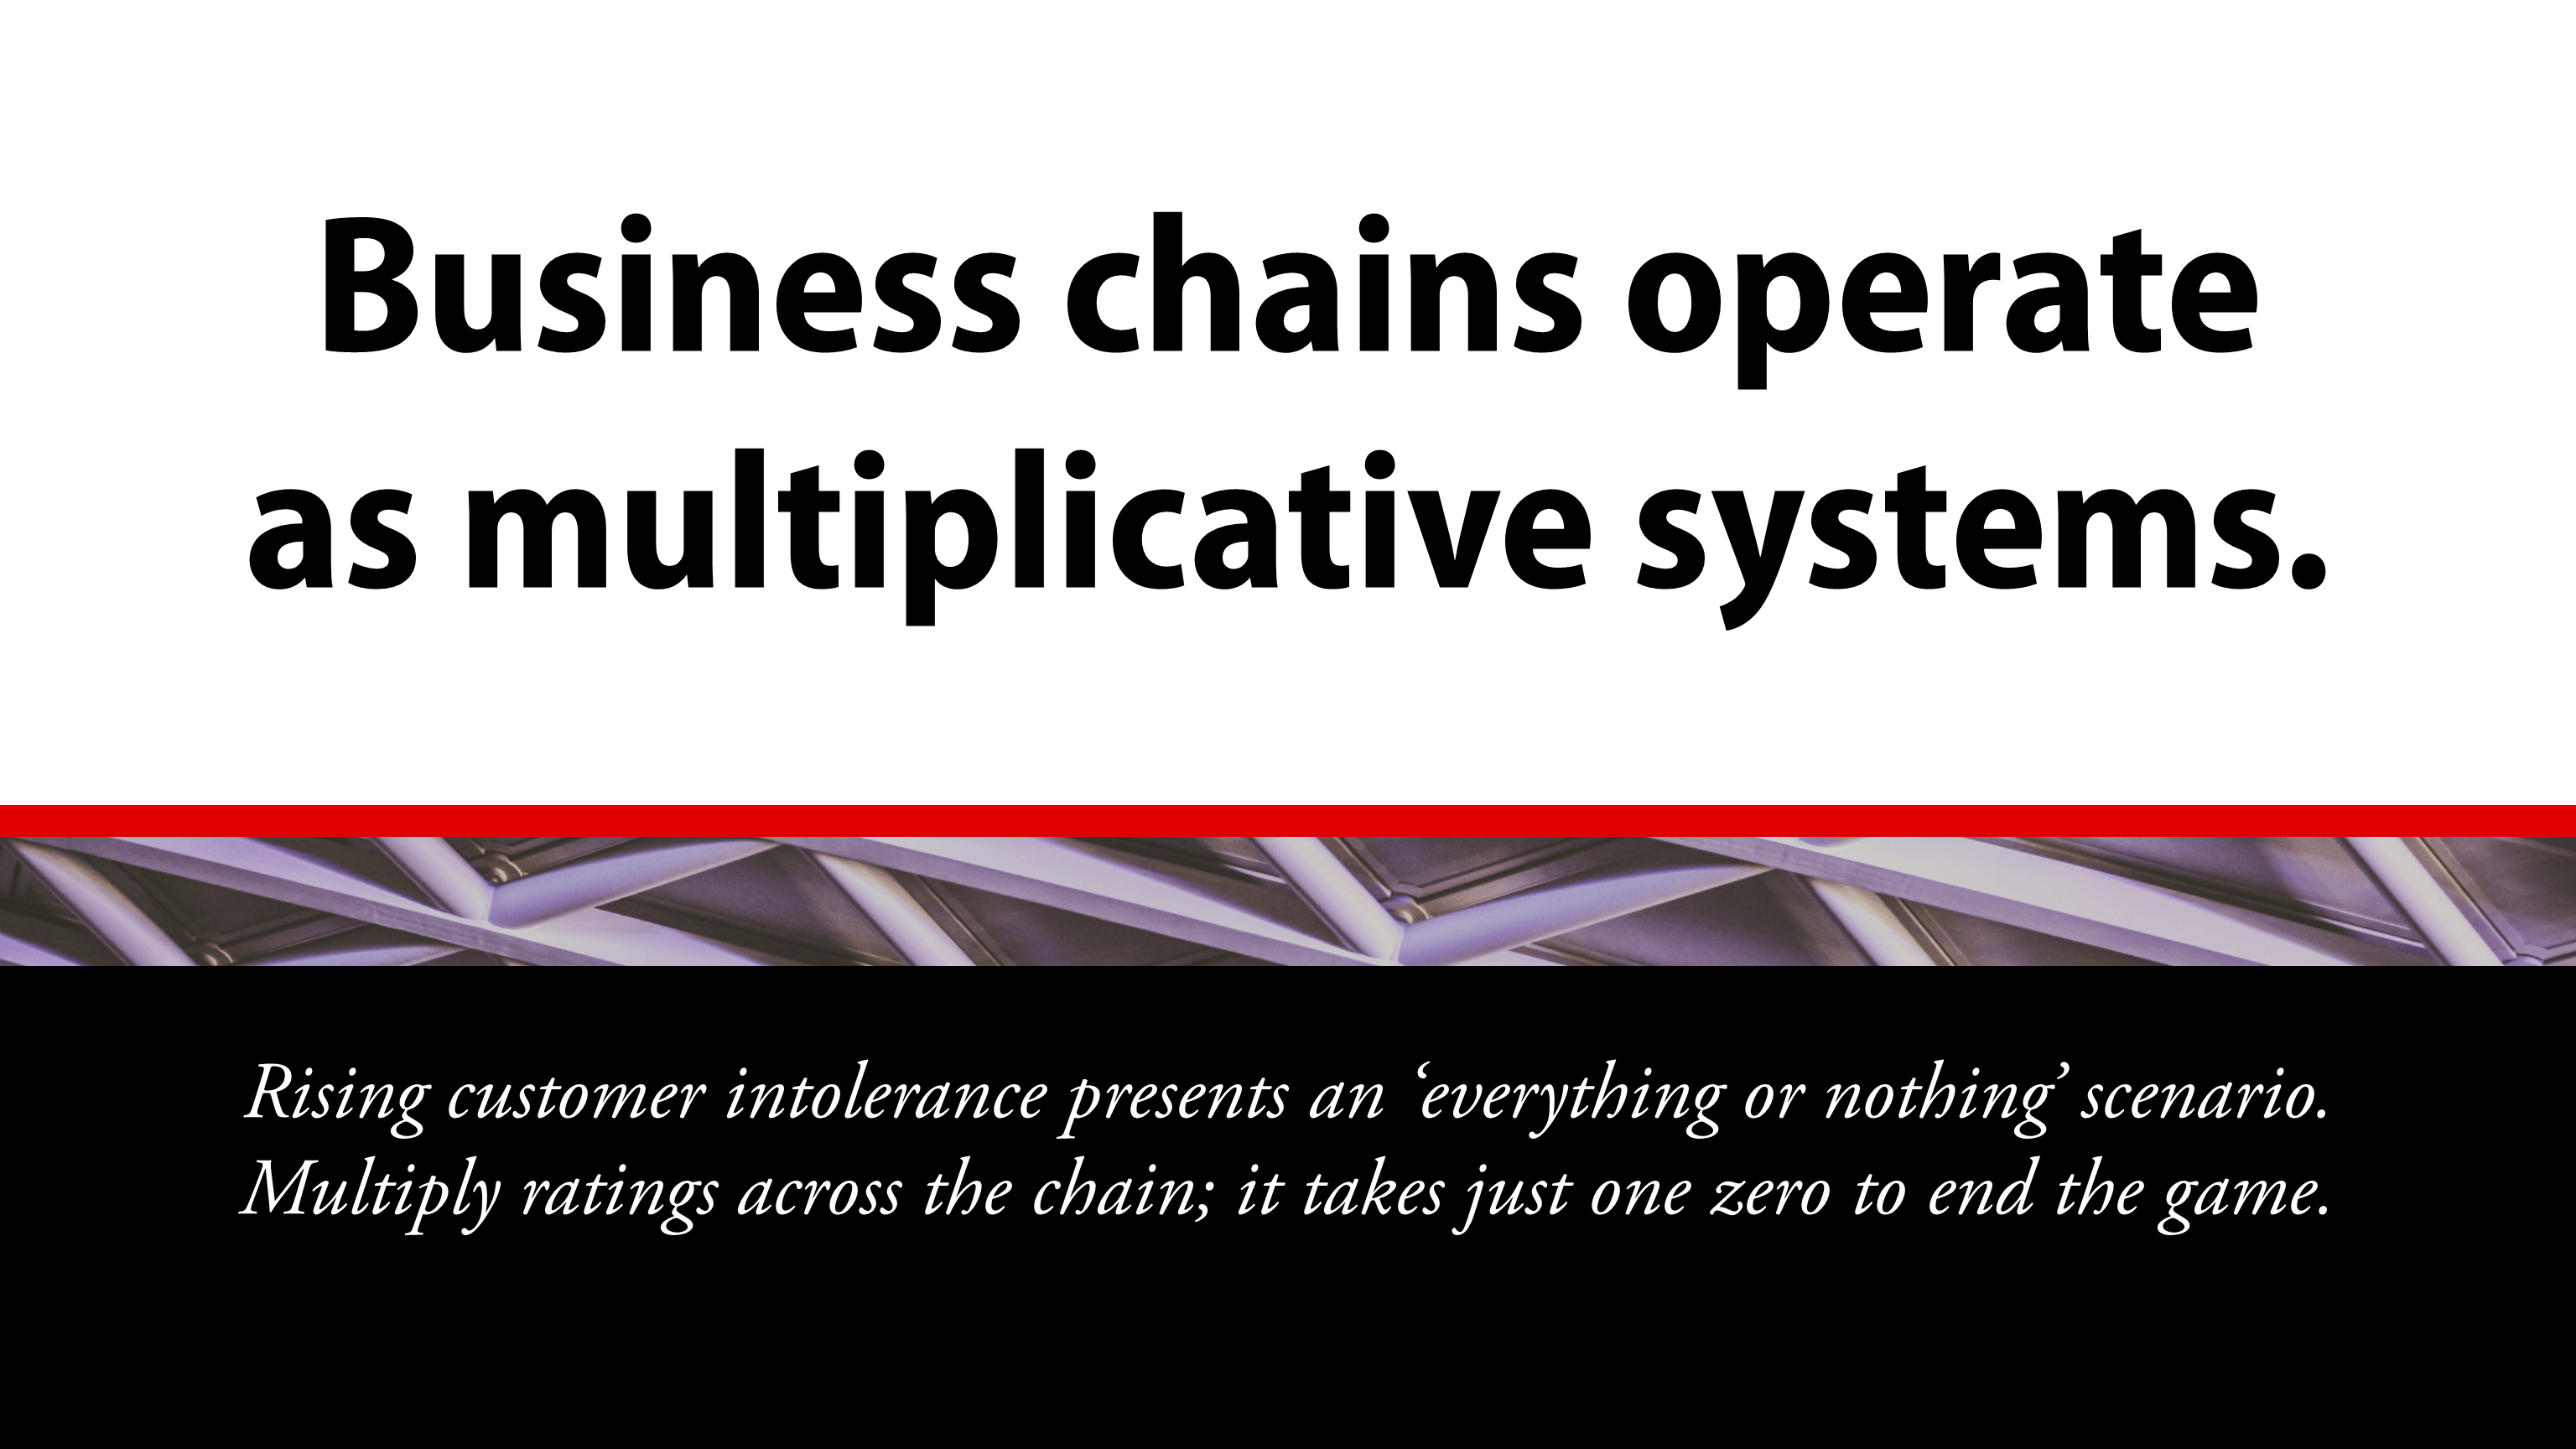 Business chains operate as multiplicative systems